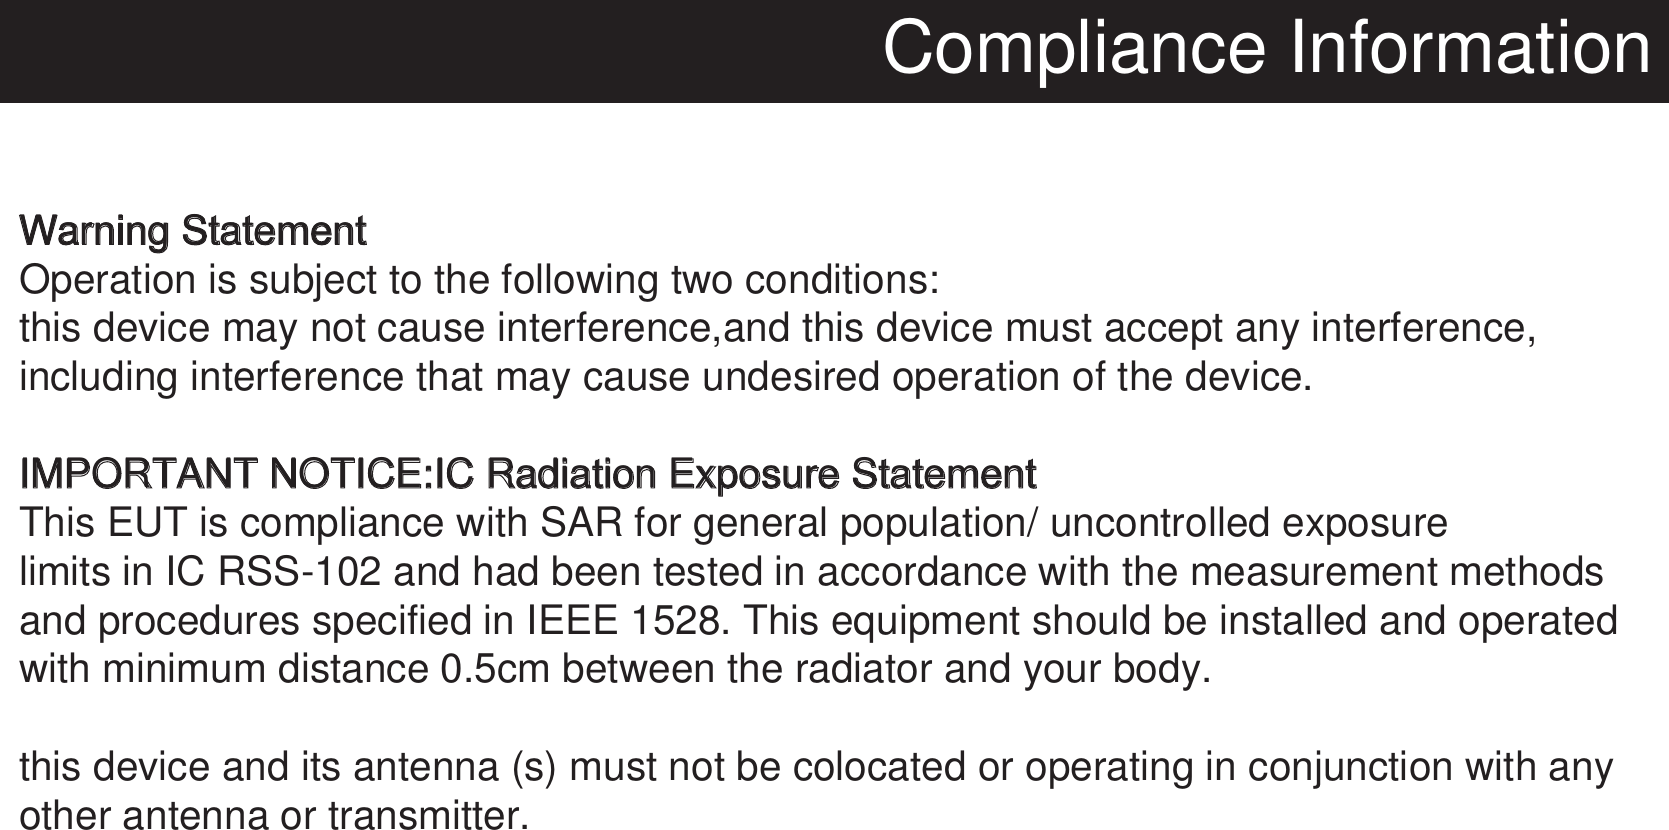 Compliance InformationWarning StatementOperation is subject to the following two conditions:this device may not cause interference,and this device must accept any interference,including interference that may cause undesired operation of the device.IMPORTANT NOTICE:IC Radiation Exposure StatementThis EUT is compliance with SAR for general population/ uncontrolled exposure limits in IC RSS-102 and had been tested in accordance with the measurement methods and procedures specified in IEEE 1528. This equipment should be installed and operatedwith minimum distance 0.5cm between the radiator and your body.this device and its antenna (s) must not be colocated or operating in conjunction with anyother antenna or transmitter. 